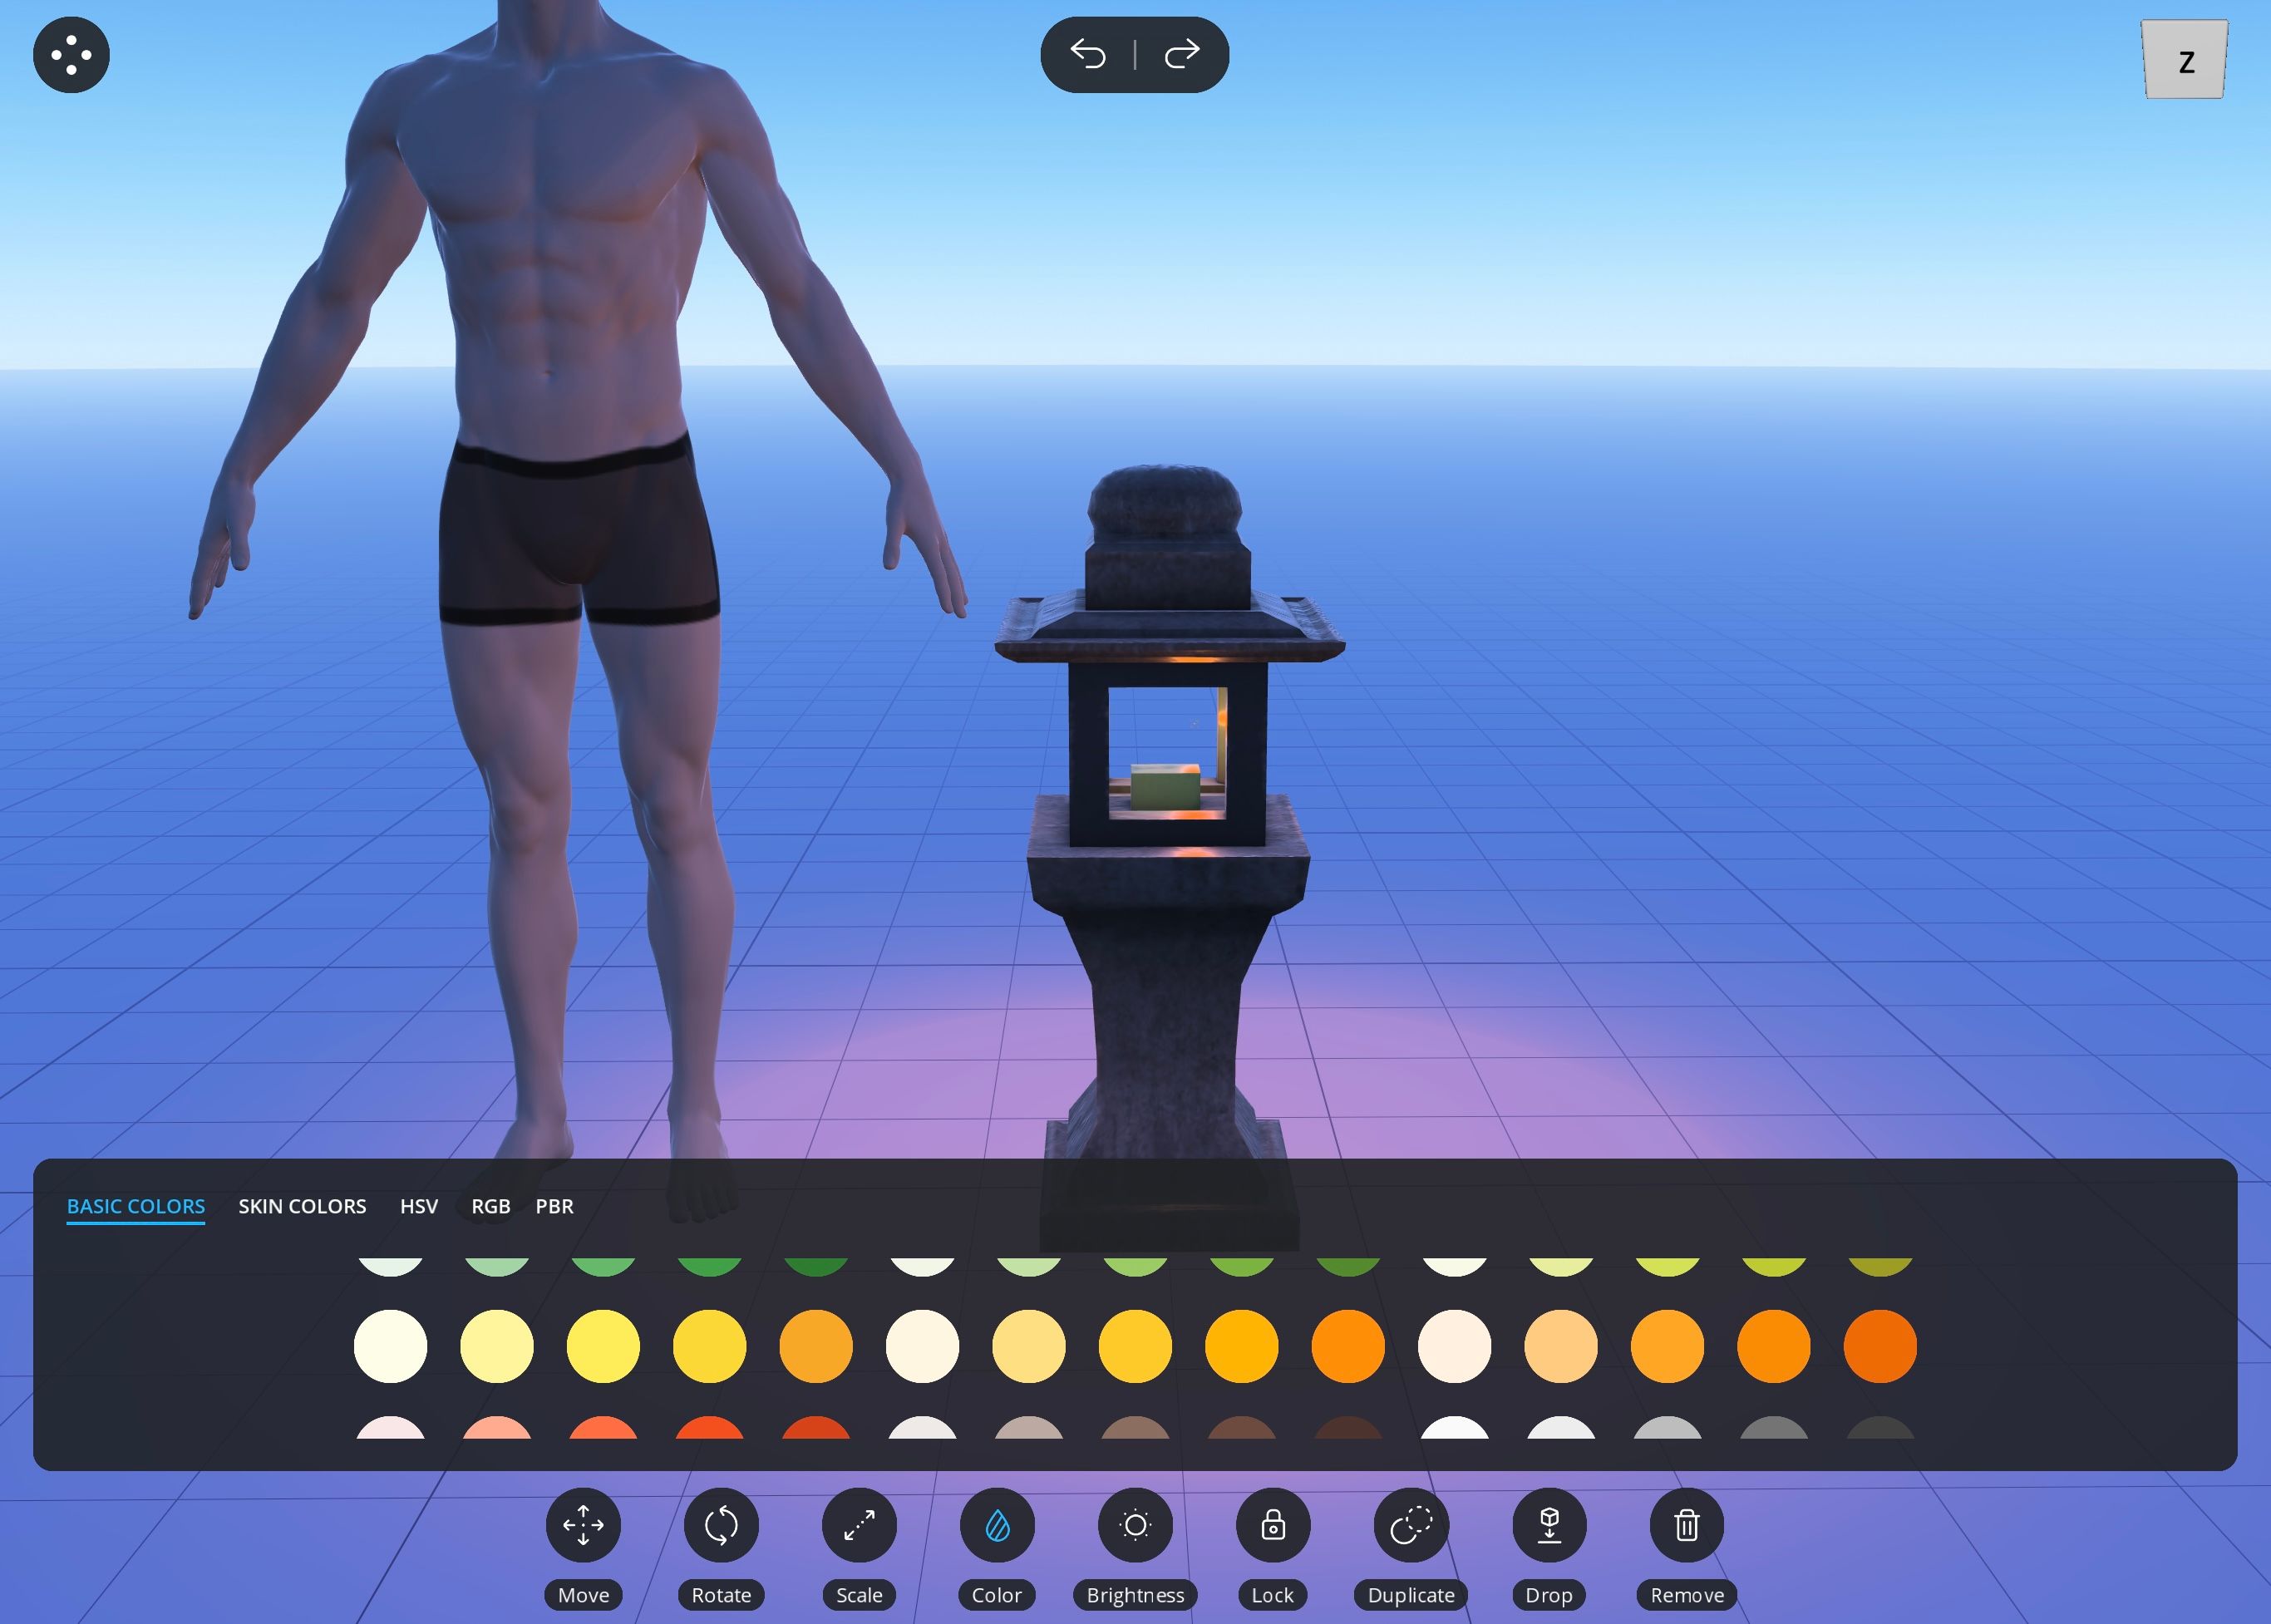 3D model of man in Magic Poser, with menu displaying lighting colors for the light source